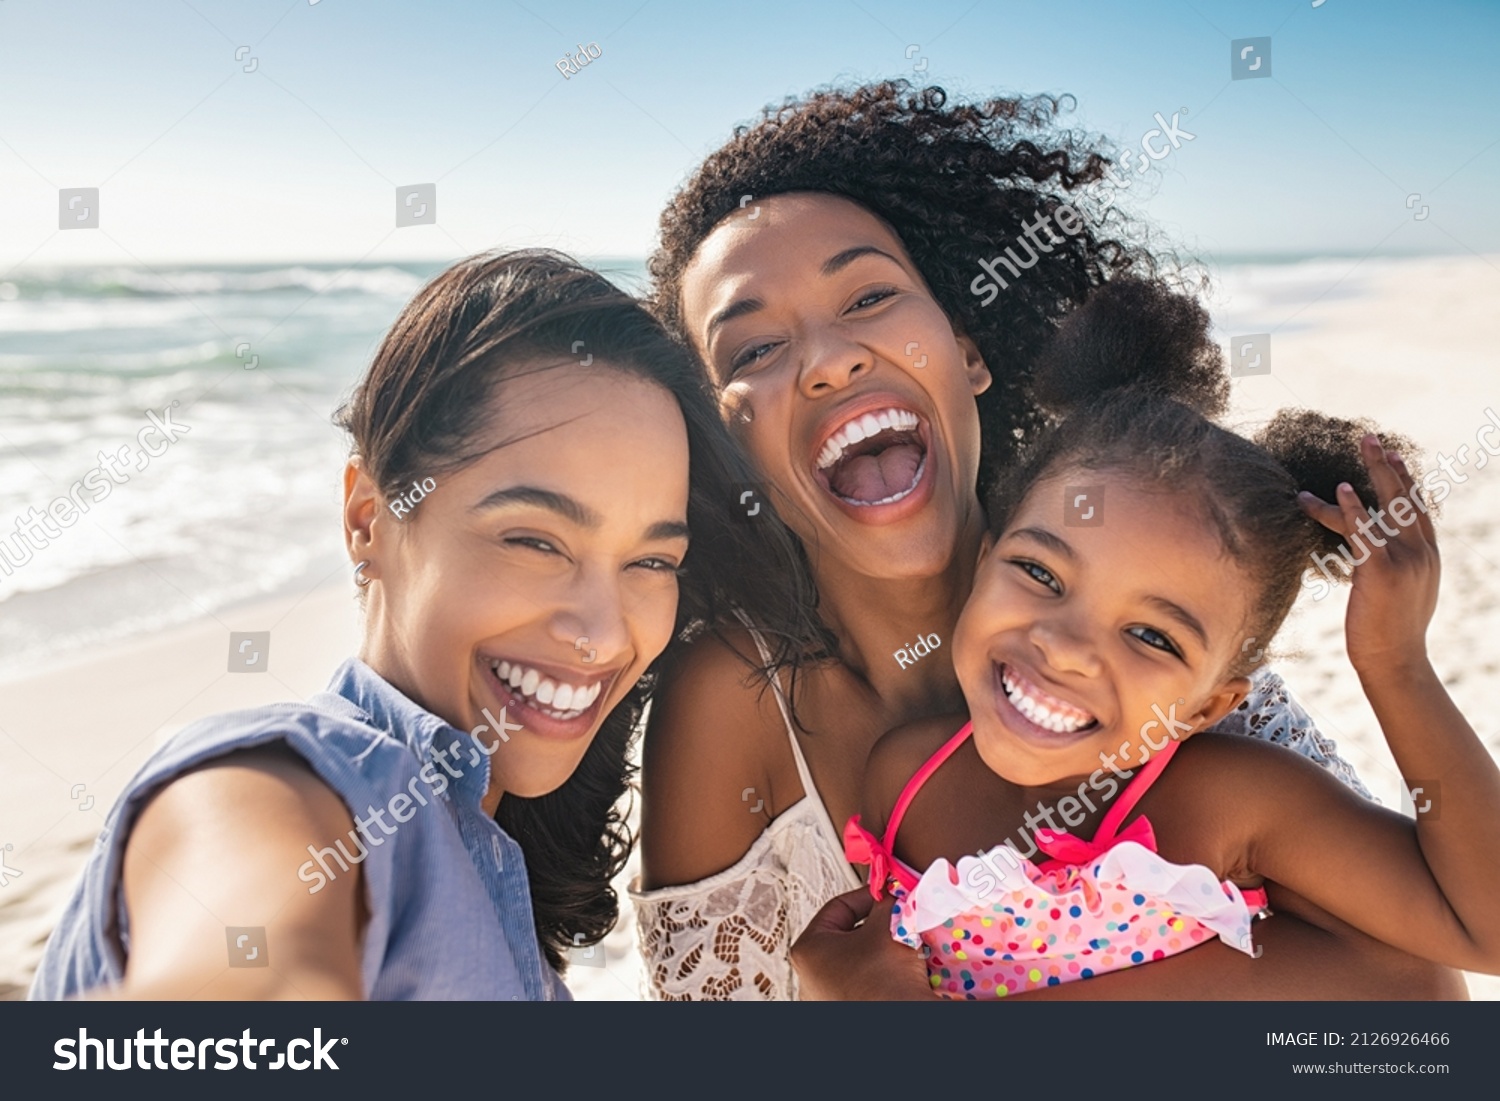 Portrait of smiling young african american woman with child taking selfie at beach with her best friend. Cheerful multiethnic gay couple enjoying at beach with daughter during summer holiday.  #2126926466